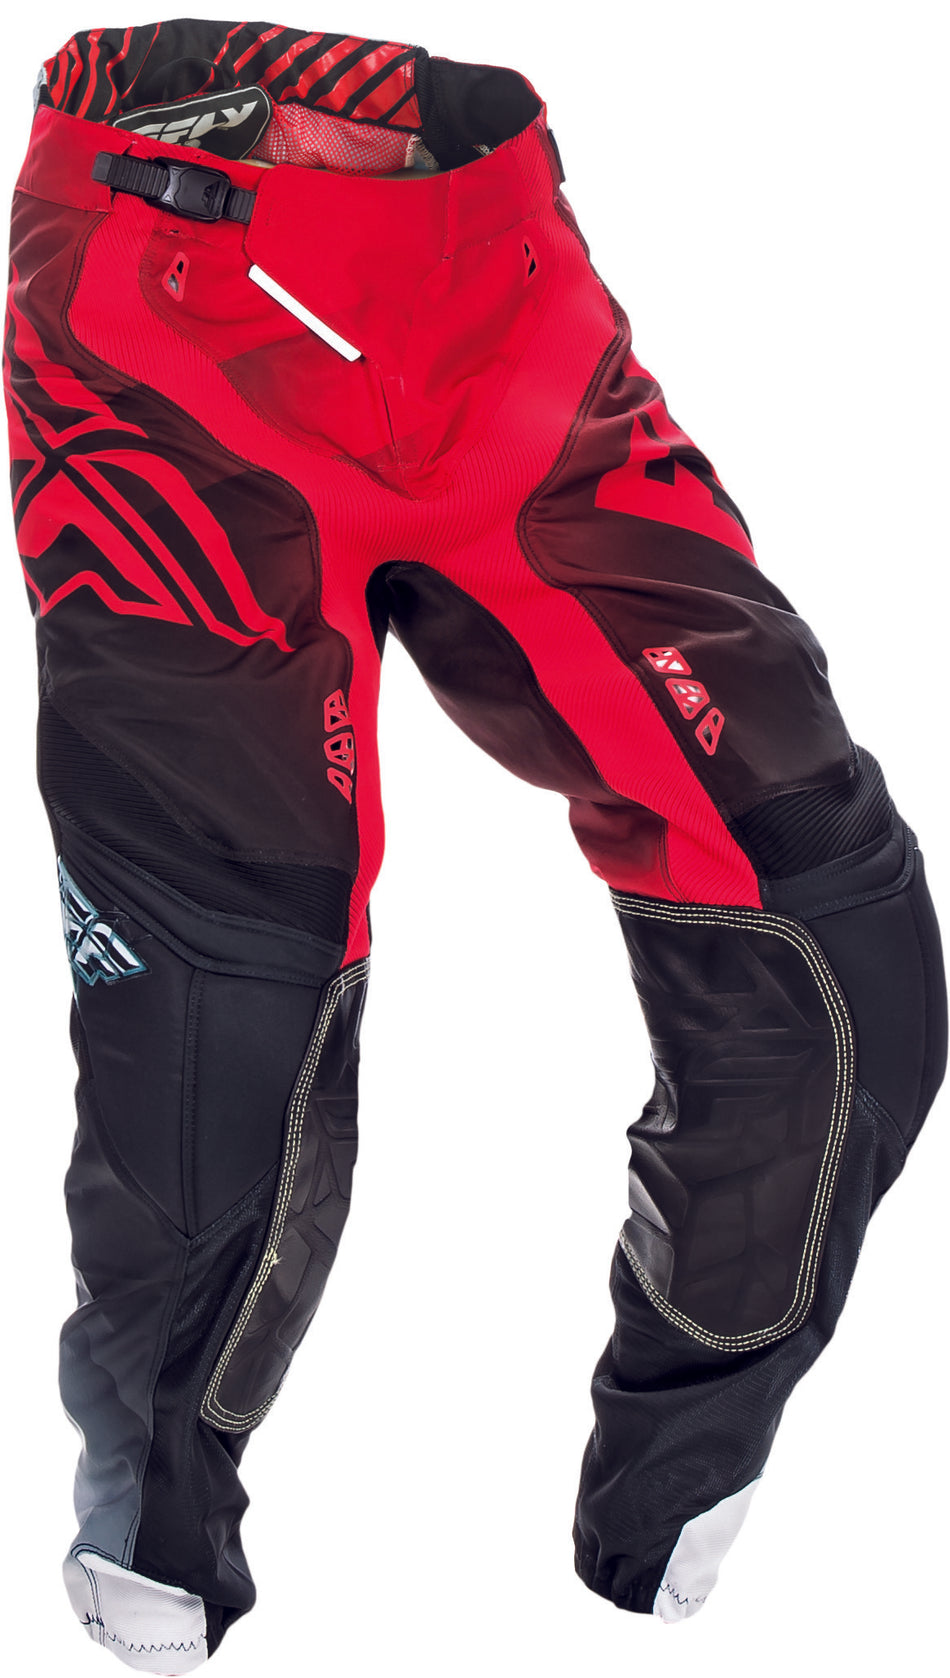 FLY RACING Lite Hydrogen Pant Red/Black/White Sz 38 370-73238